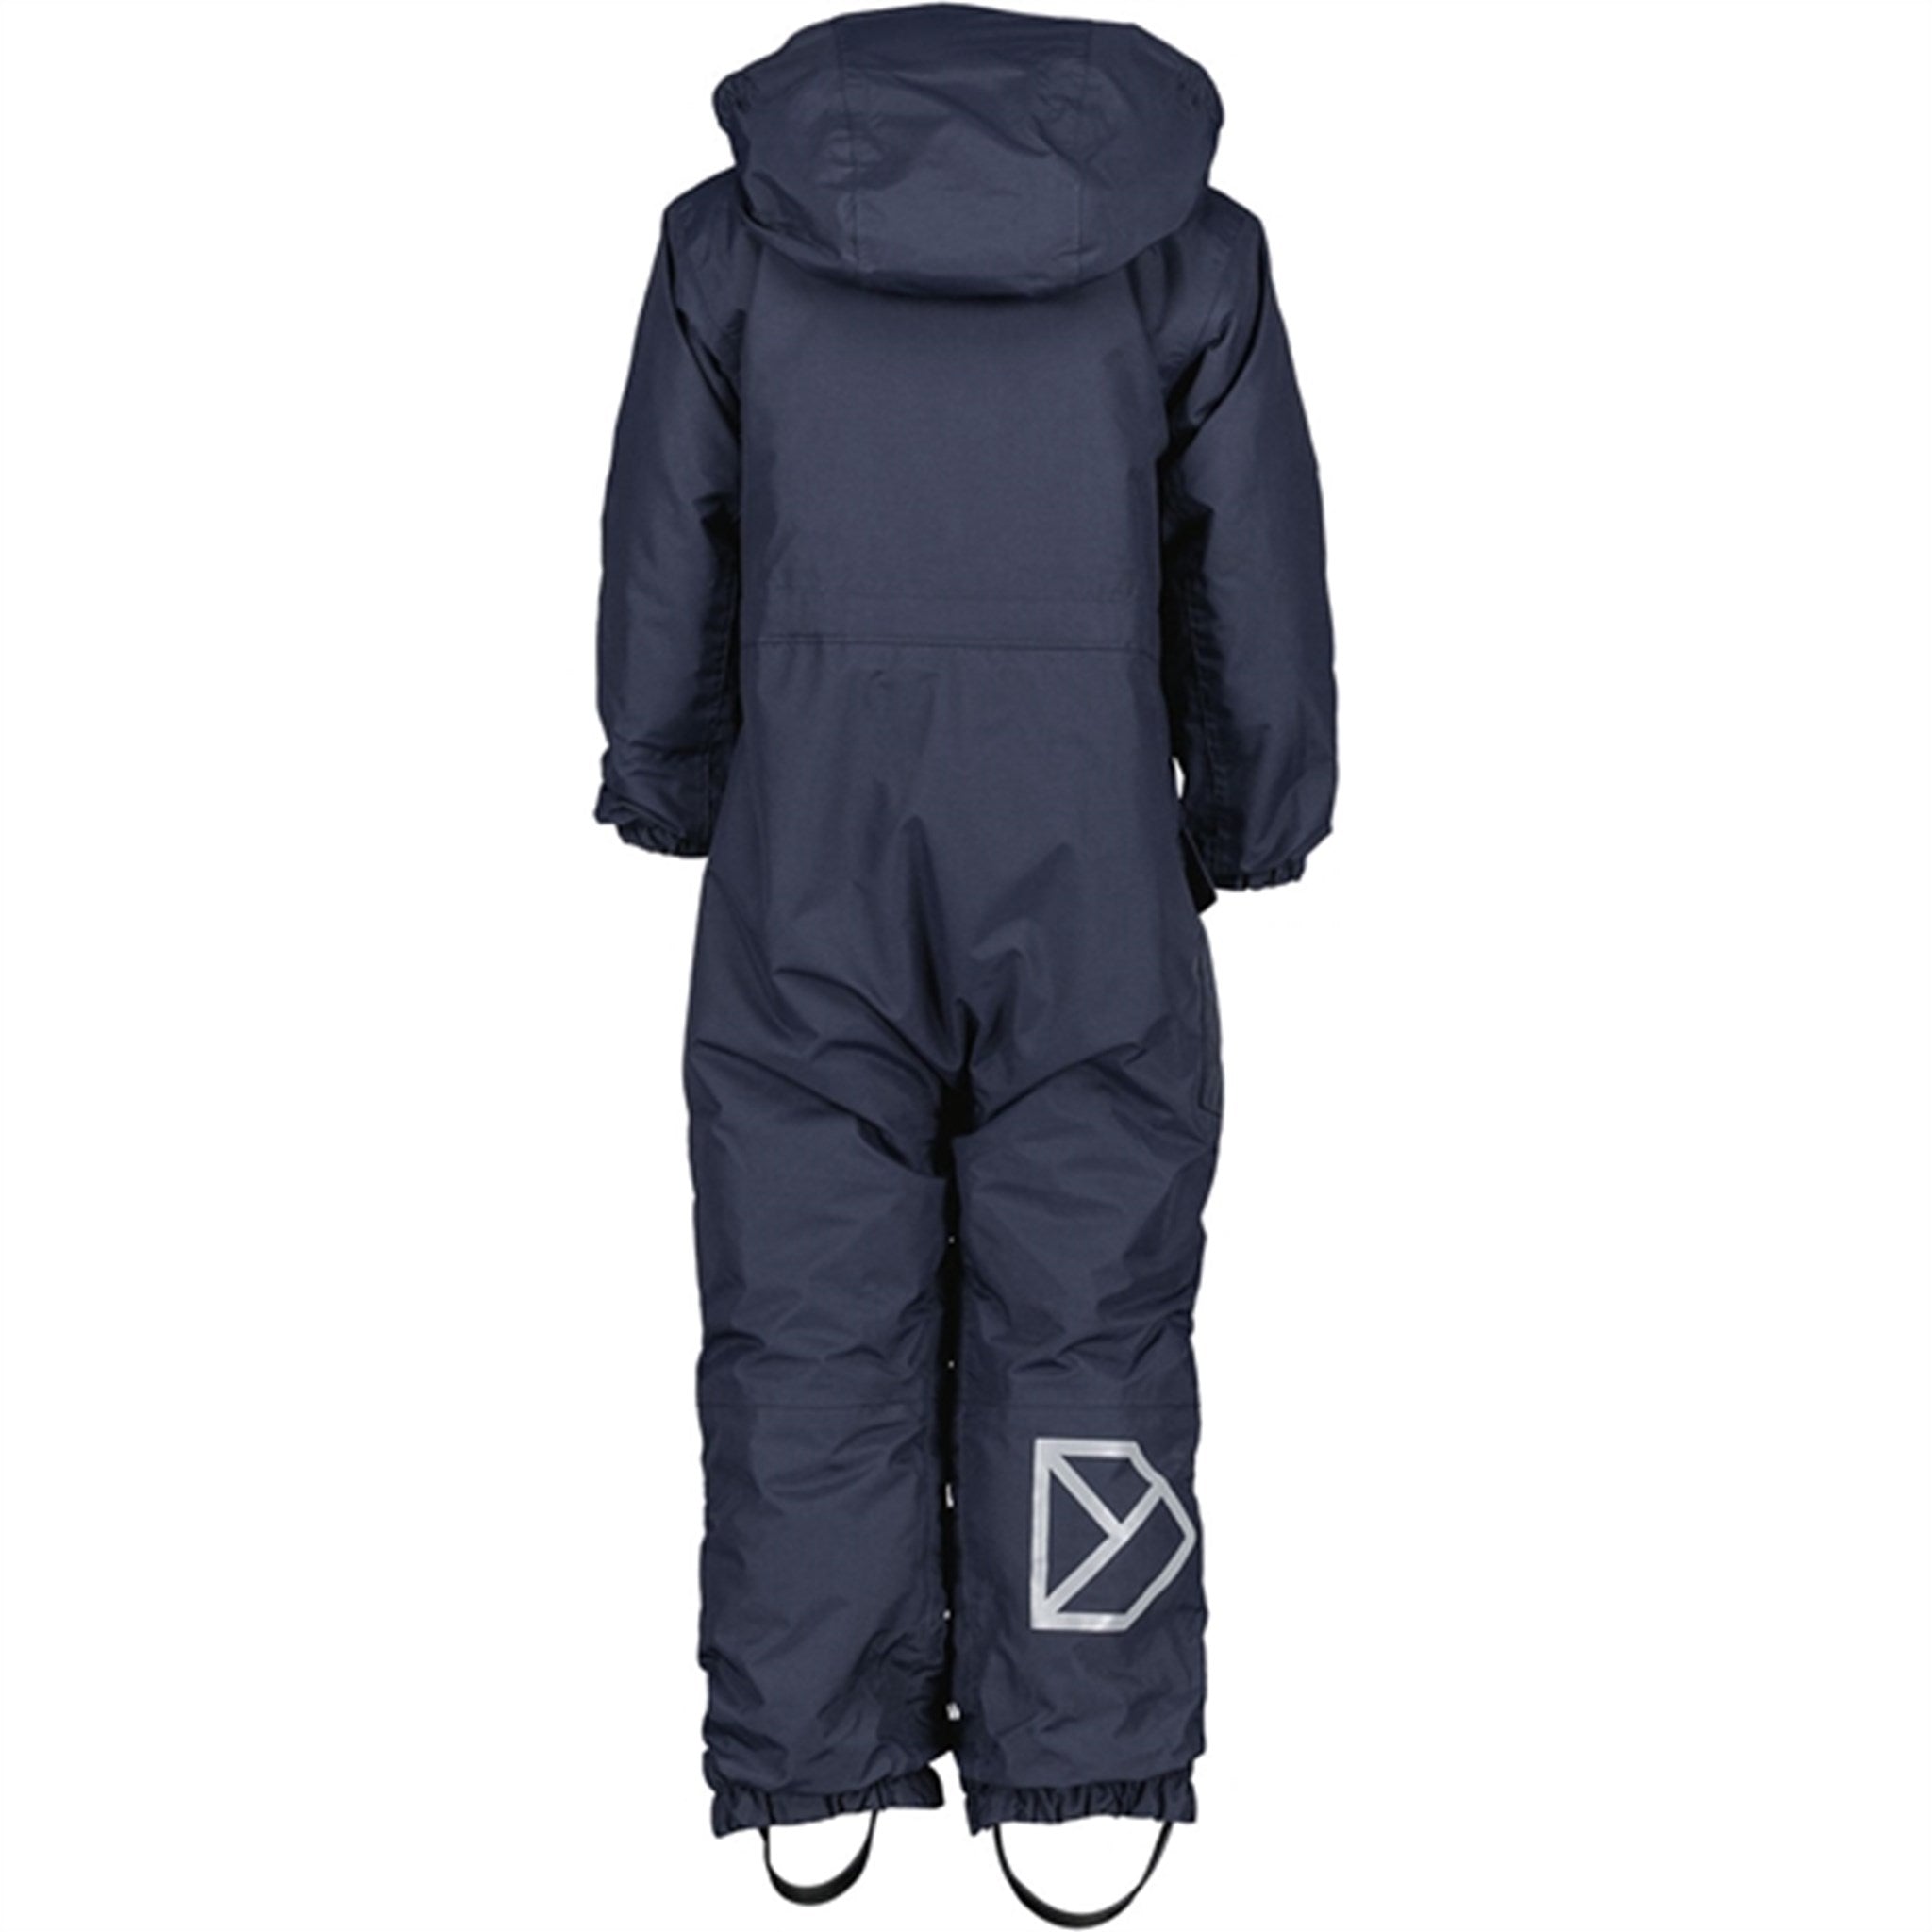 Didriksons Navy Rio Kids Coverall 7